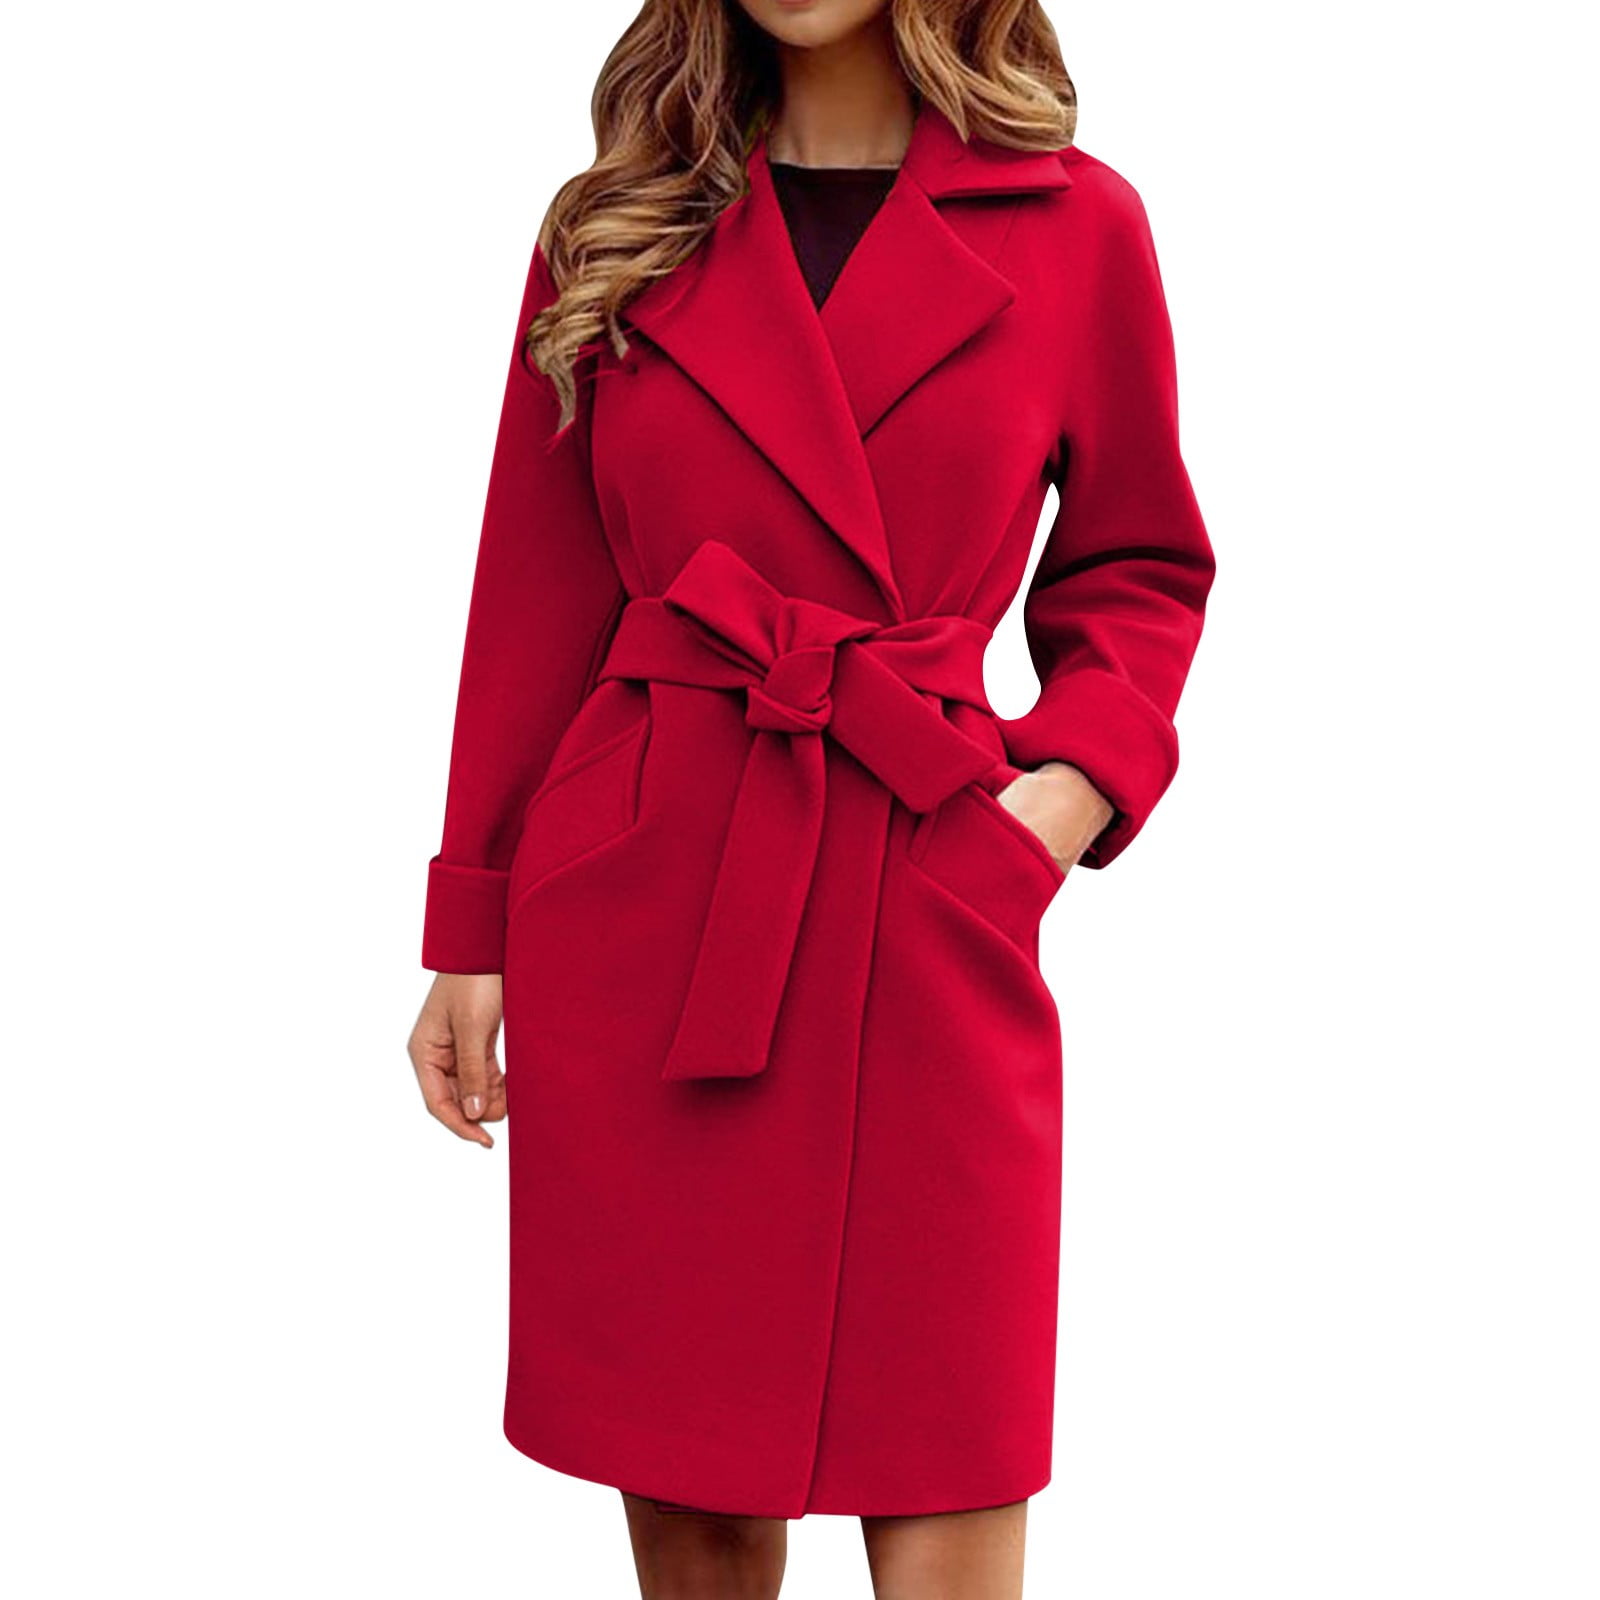 CAICJ98 Womens Tops Women's Winter Outerwear Overcoat Peter Pan Collar  Mid-Thigh A-Line Single Pea Coat Red,S